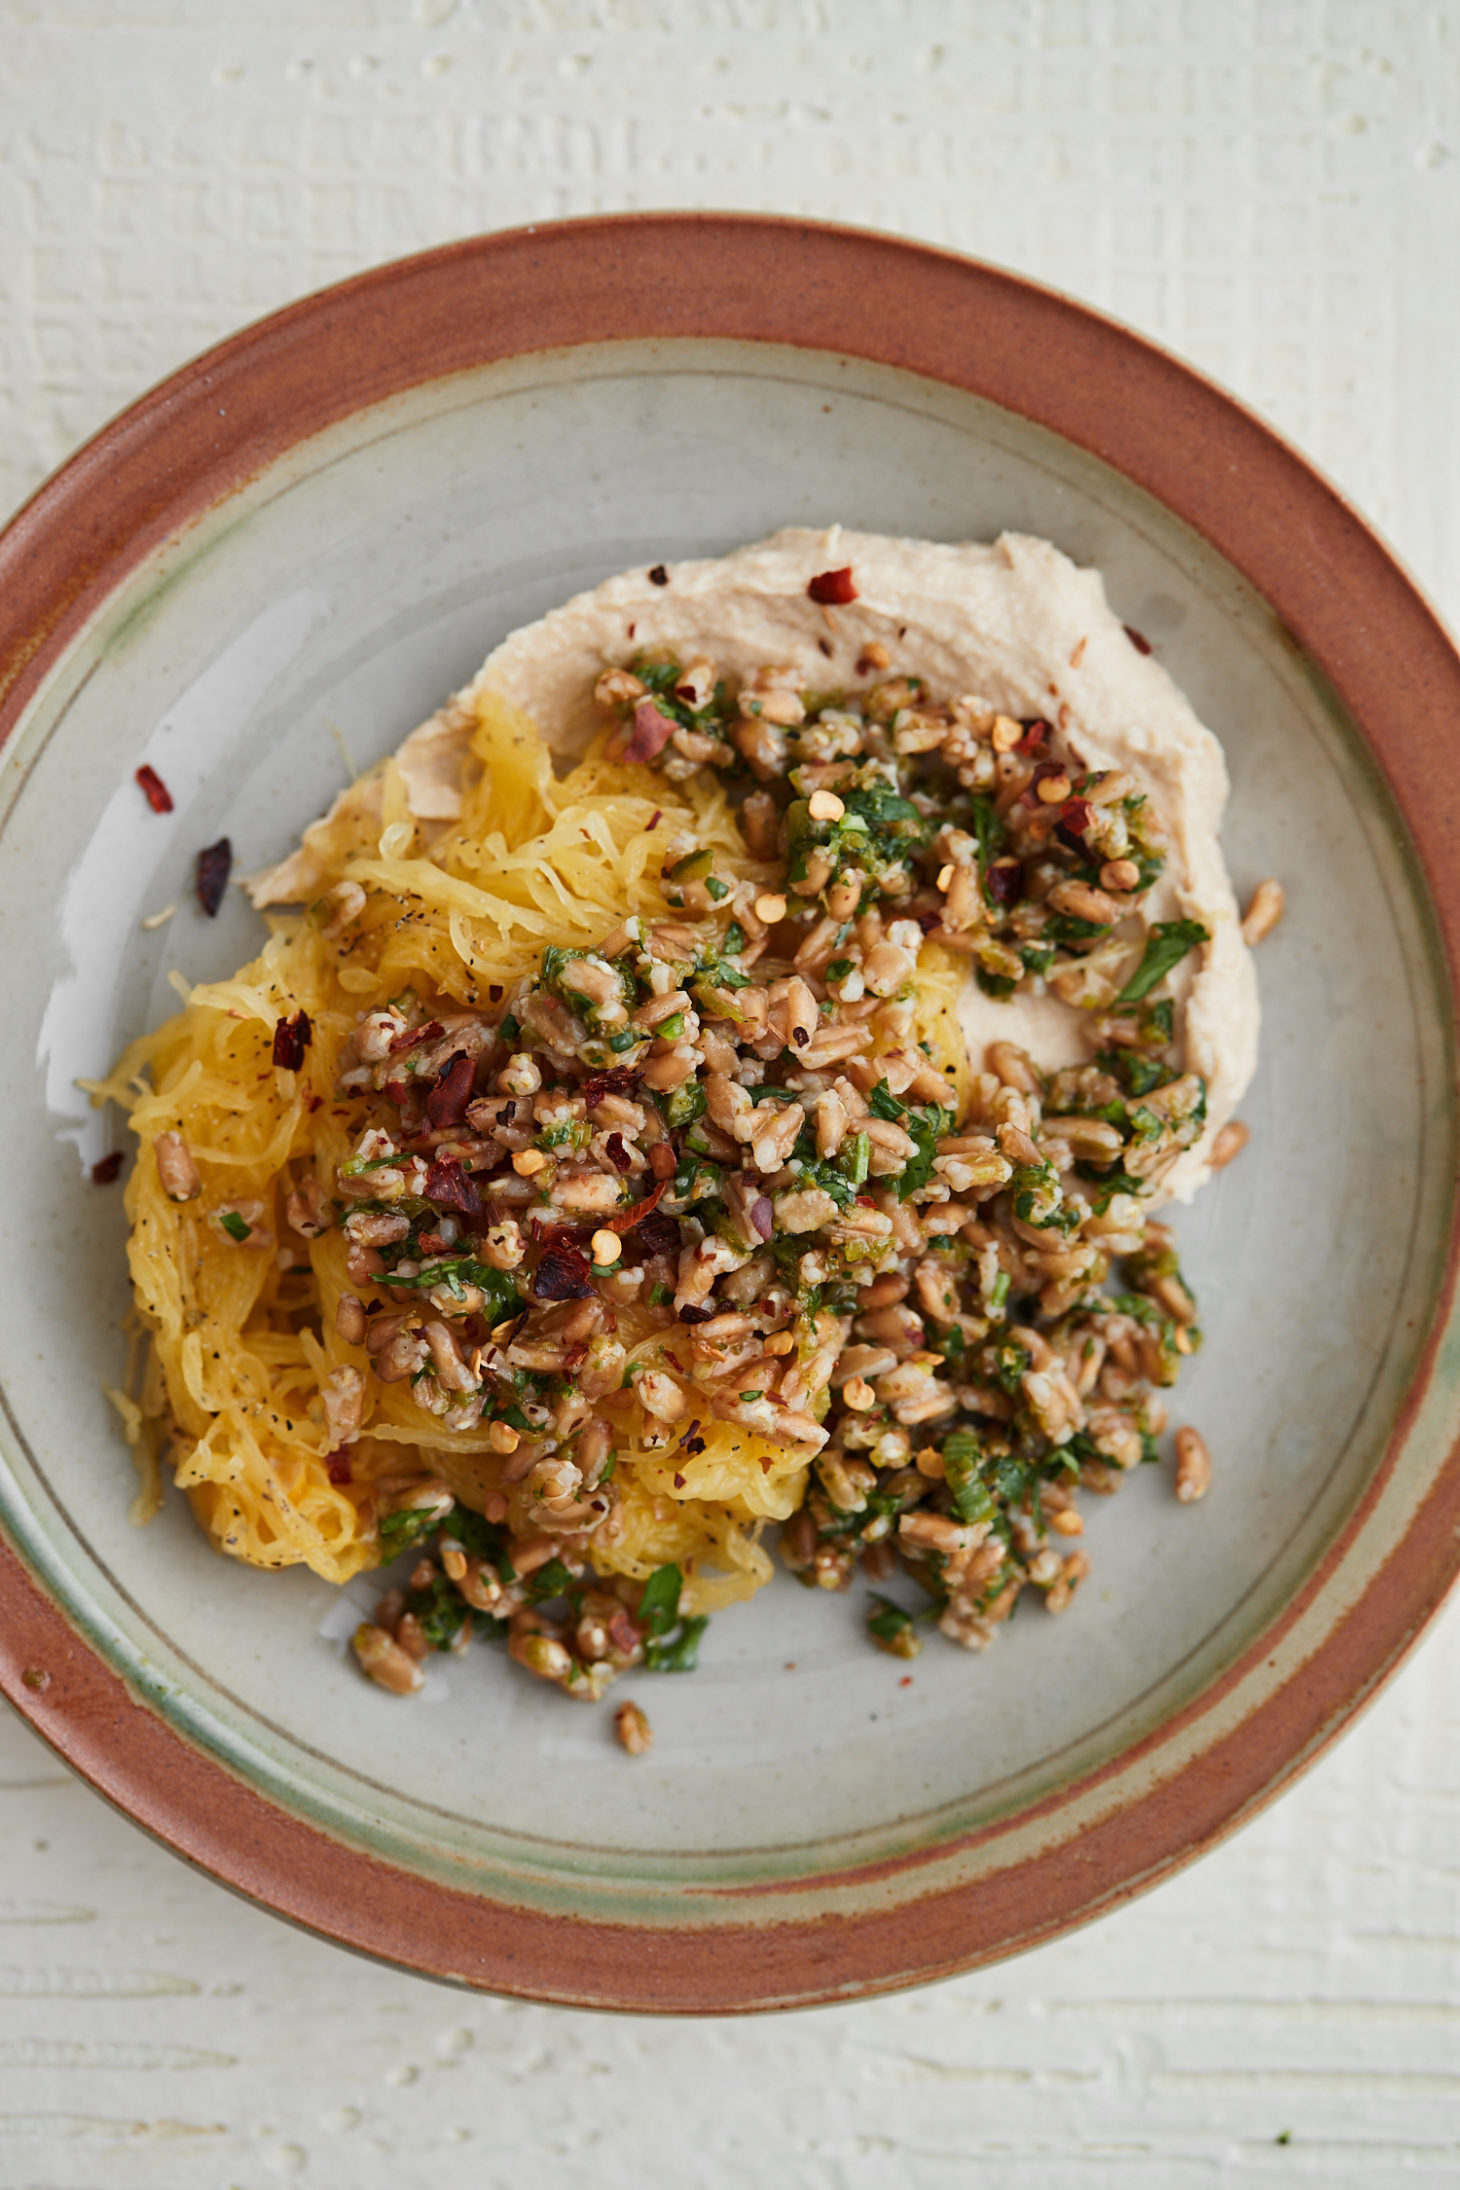 A grey plate with brown rim topped with hummus, spaghetti squash, and farro.